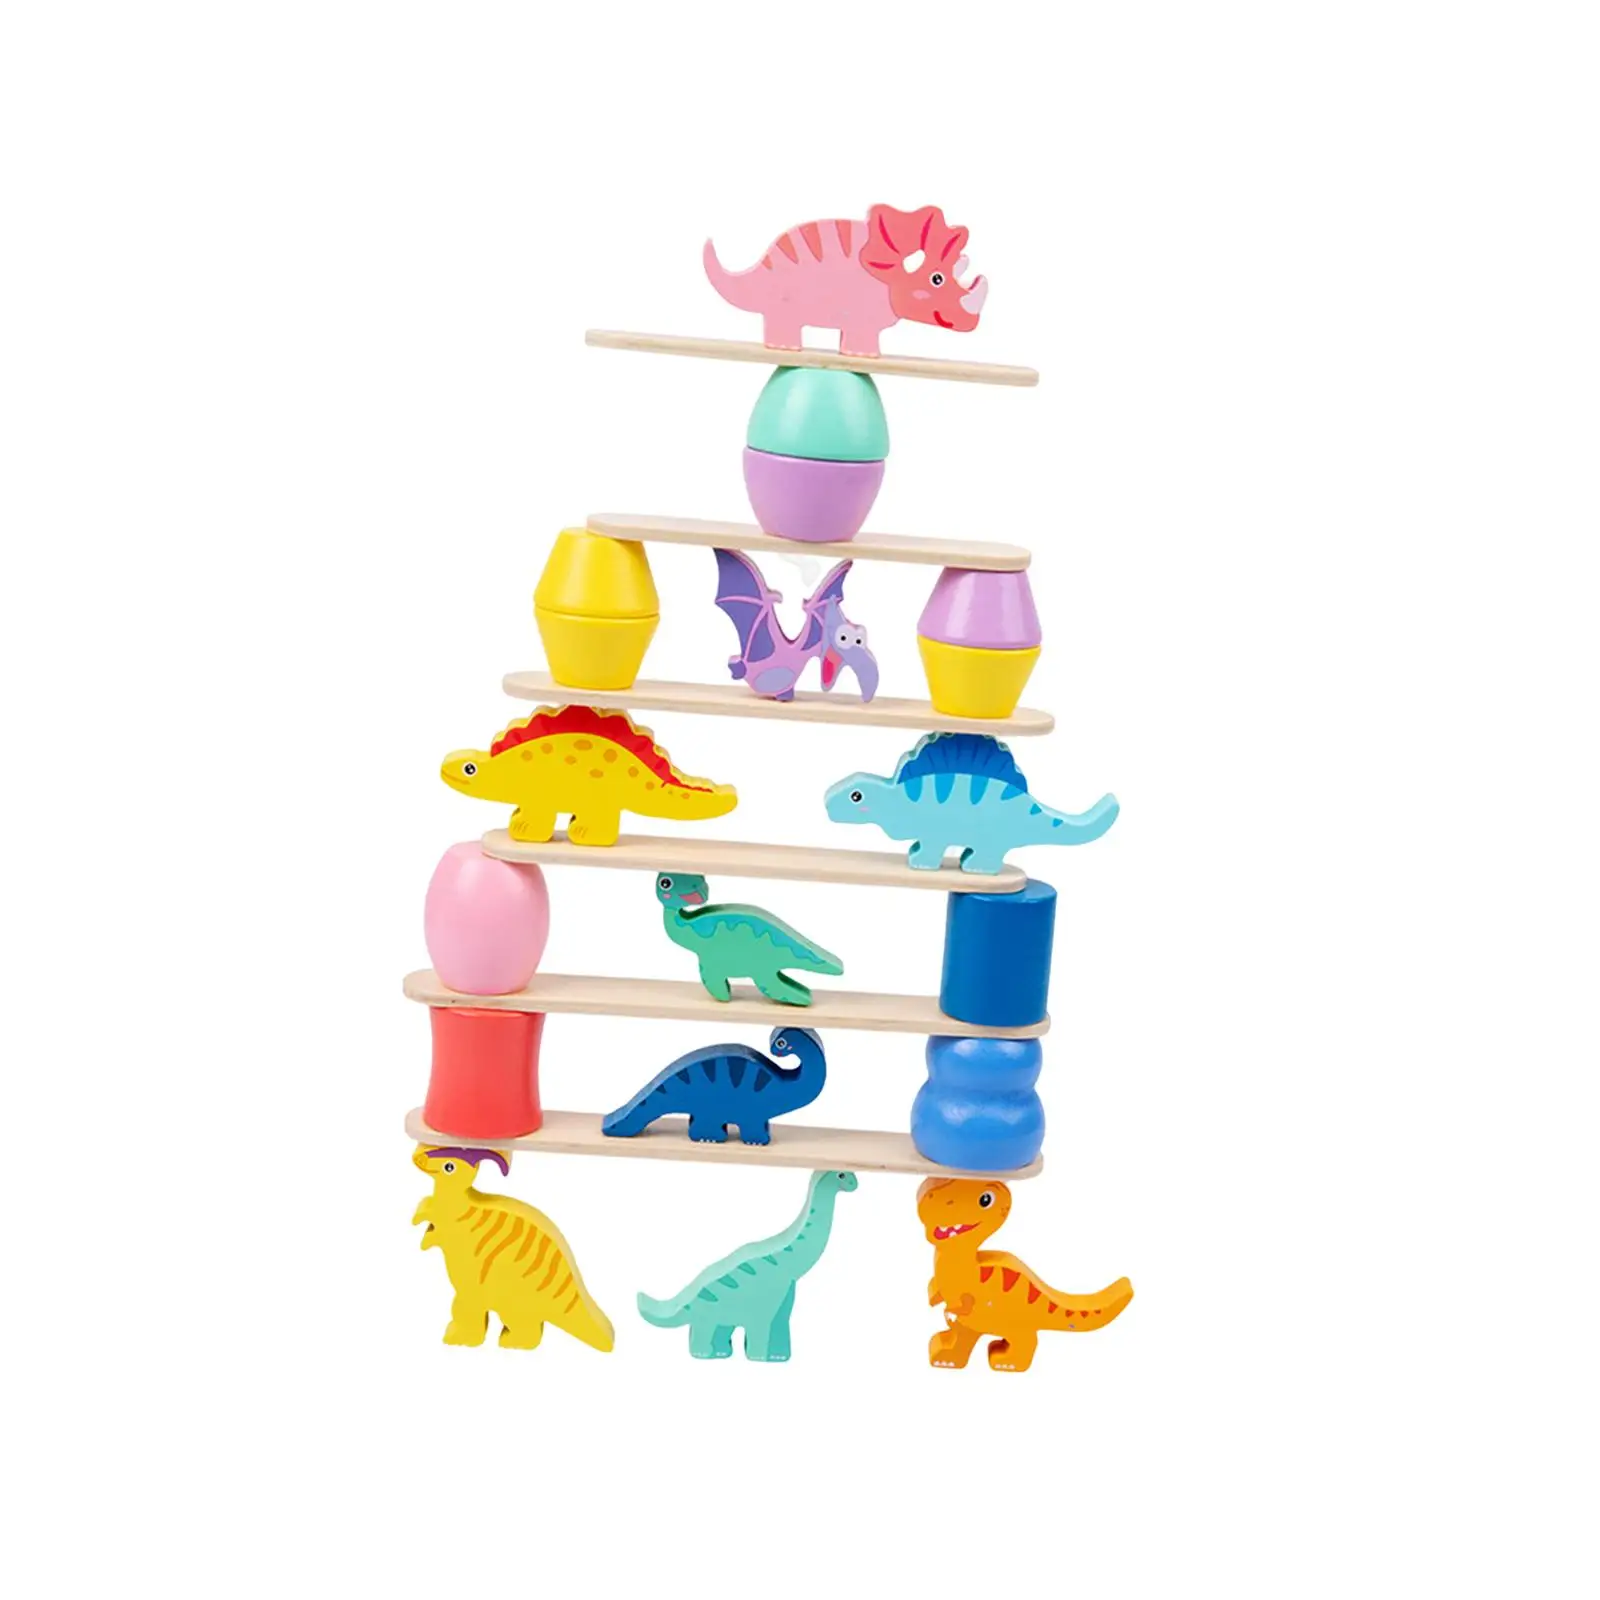 Stackable Dinosaur Toys Montessori Toys Stacking Building Blocks for 1 2 3 4 5 Year Old Babies Boys Girls Toddlers Birthday Gift